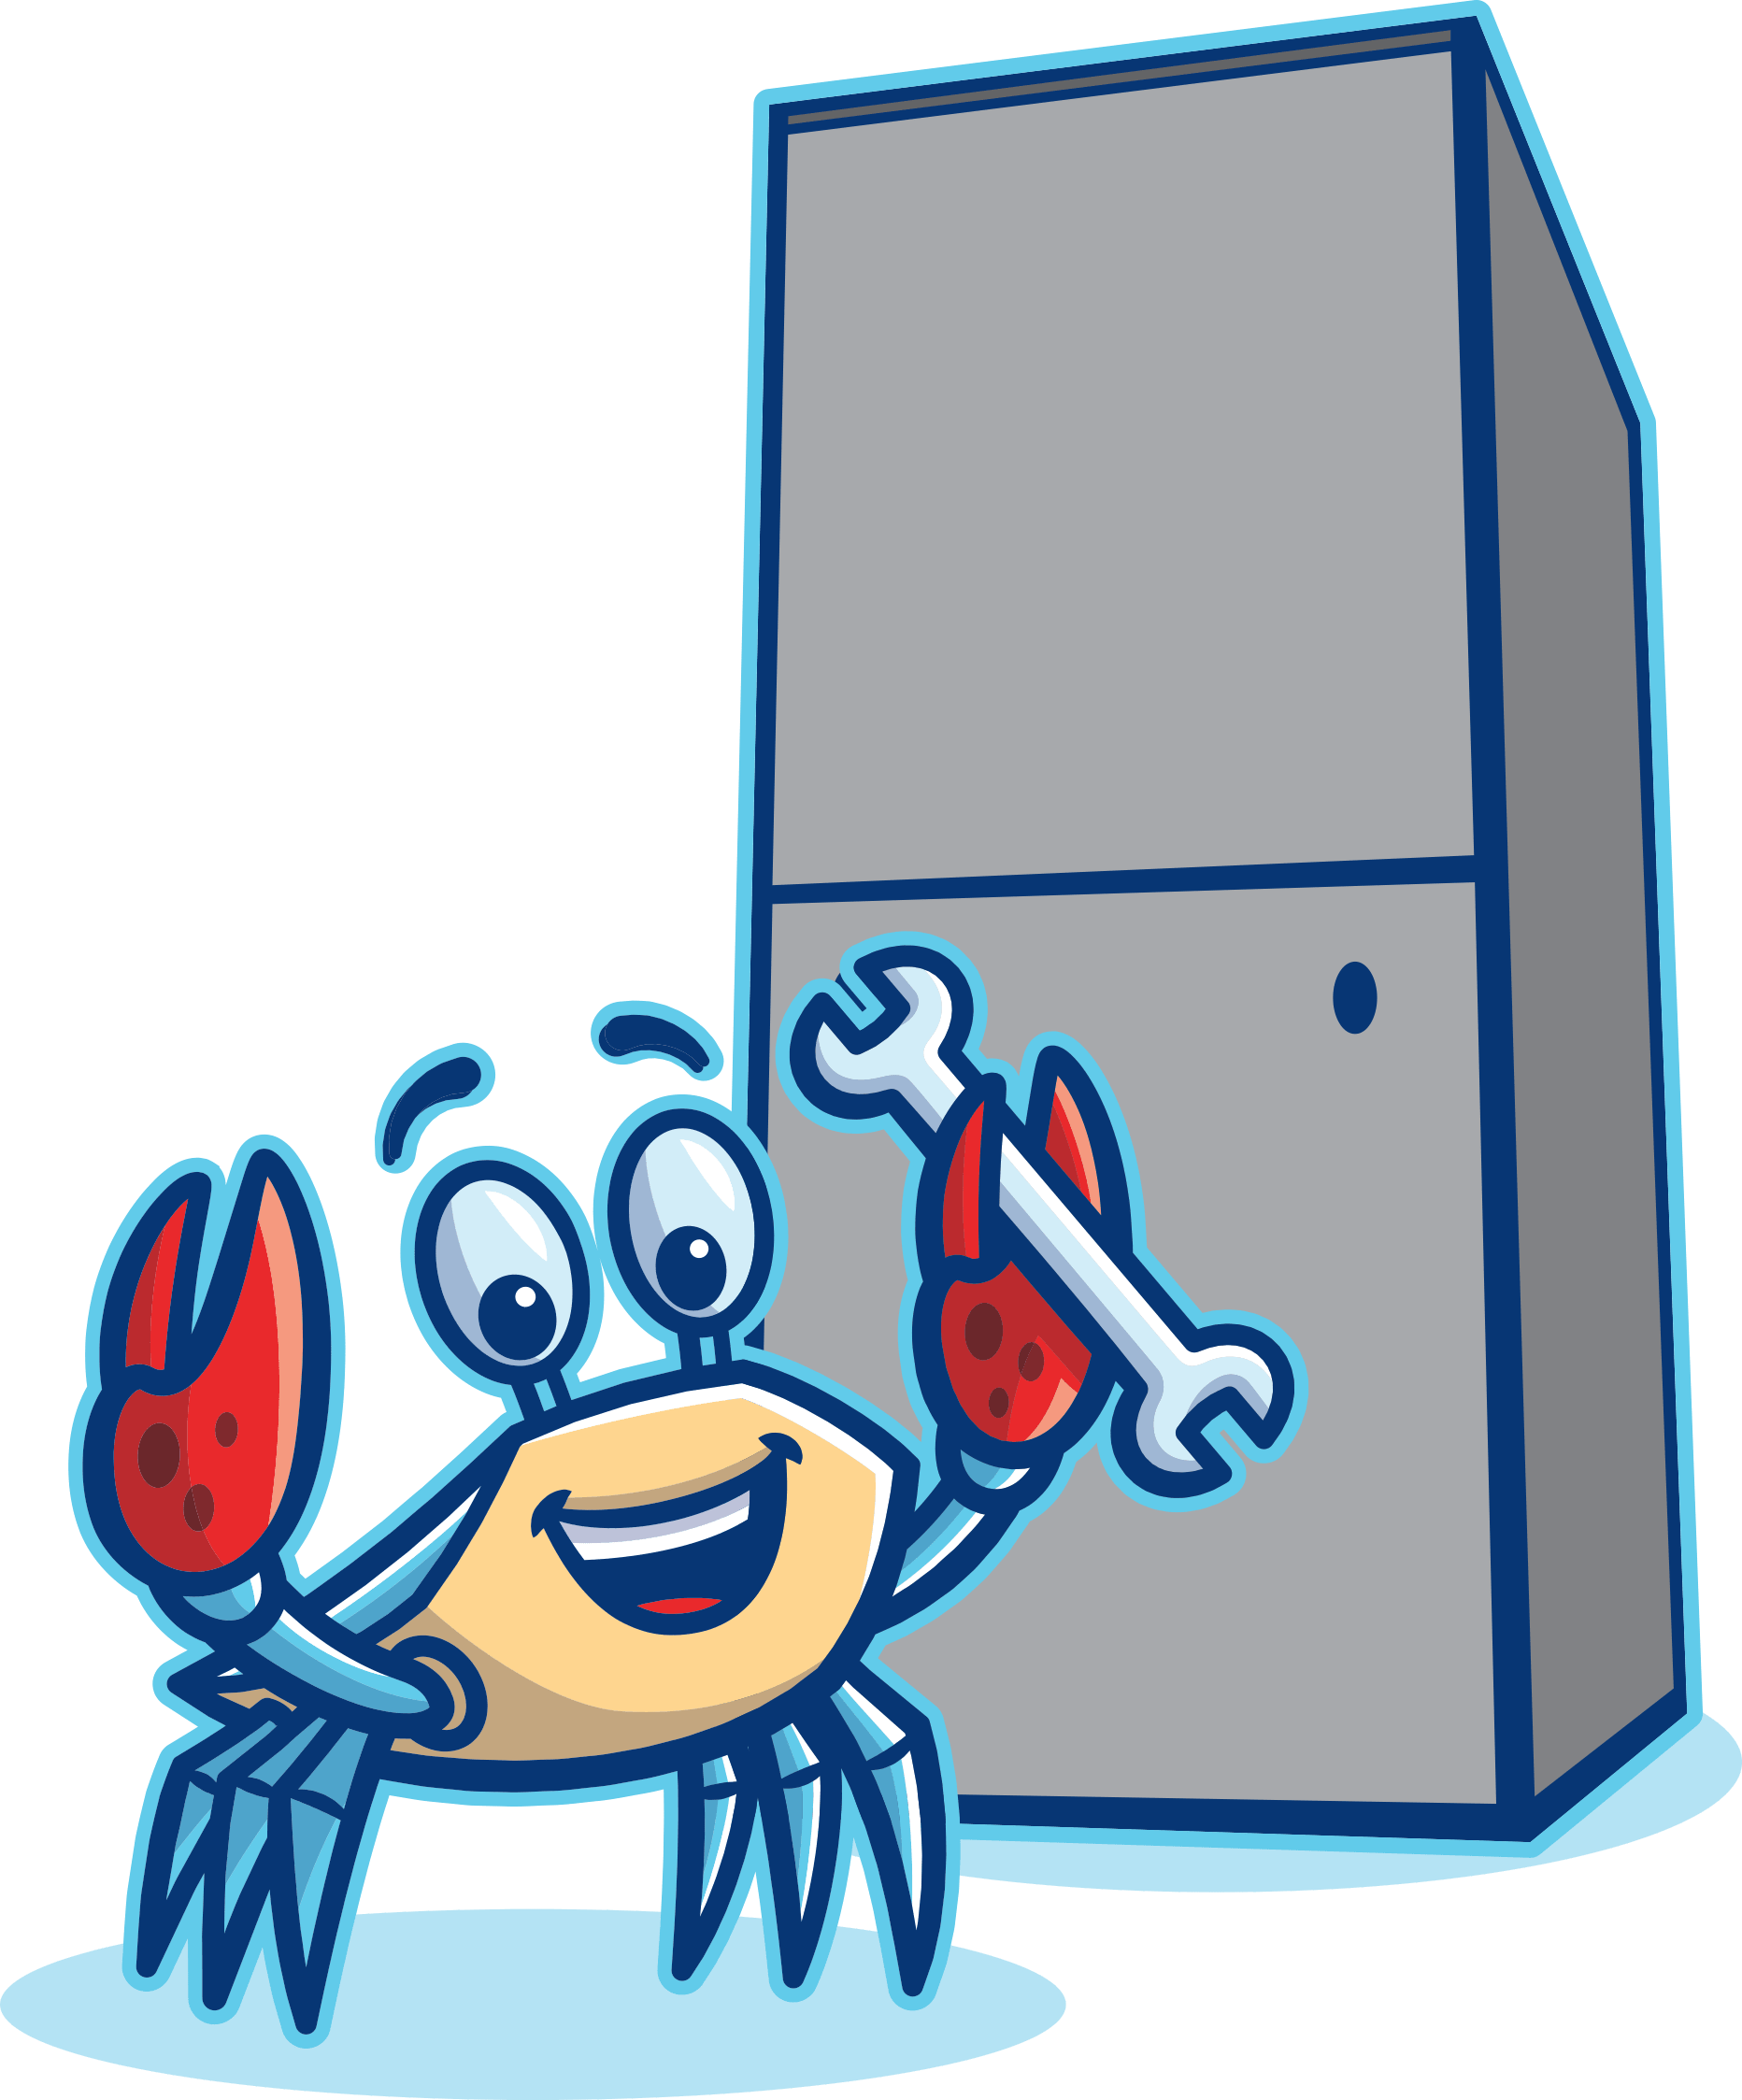 Call us for Air Conditioner repair Easton MD.